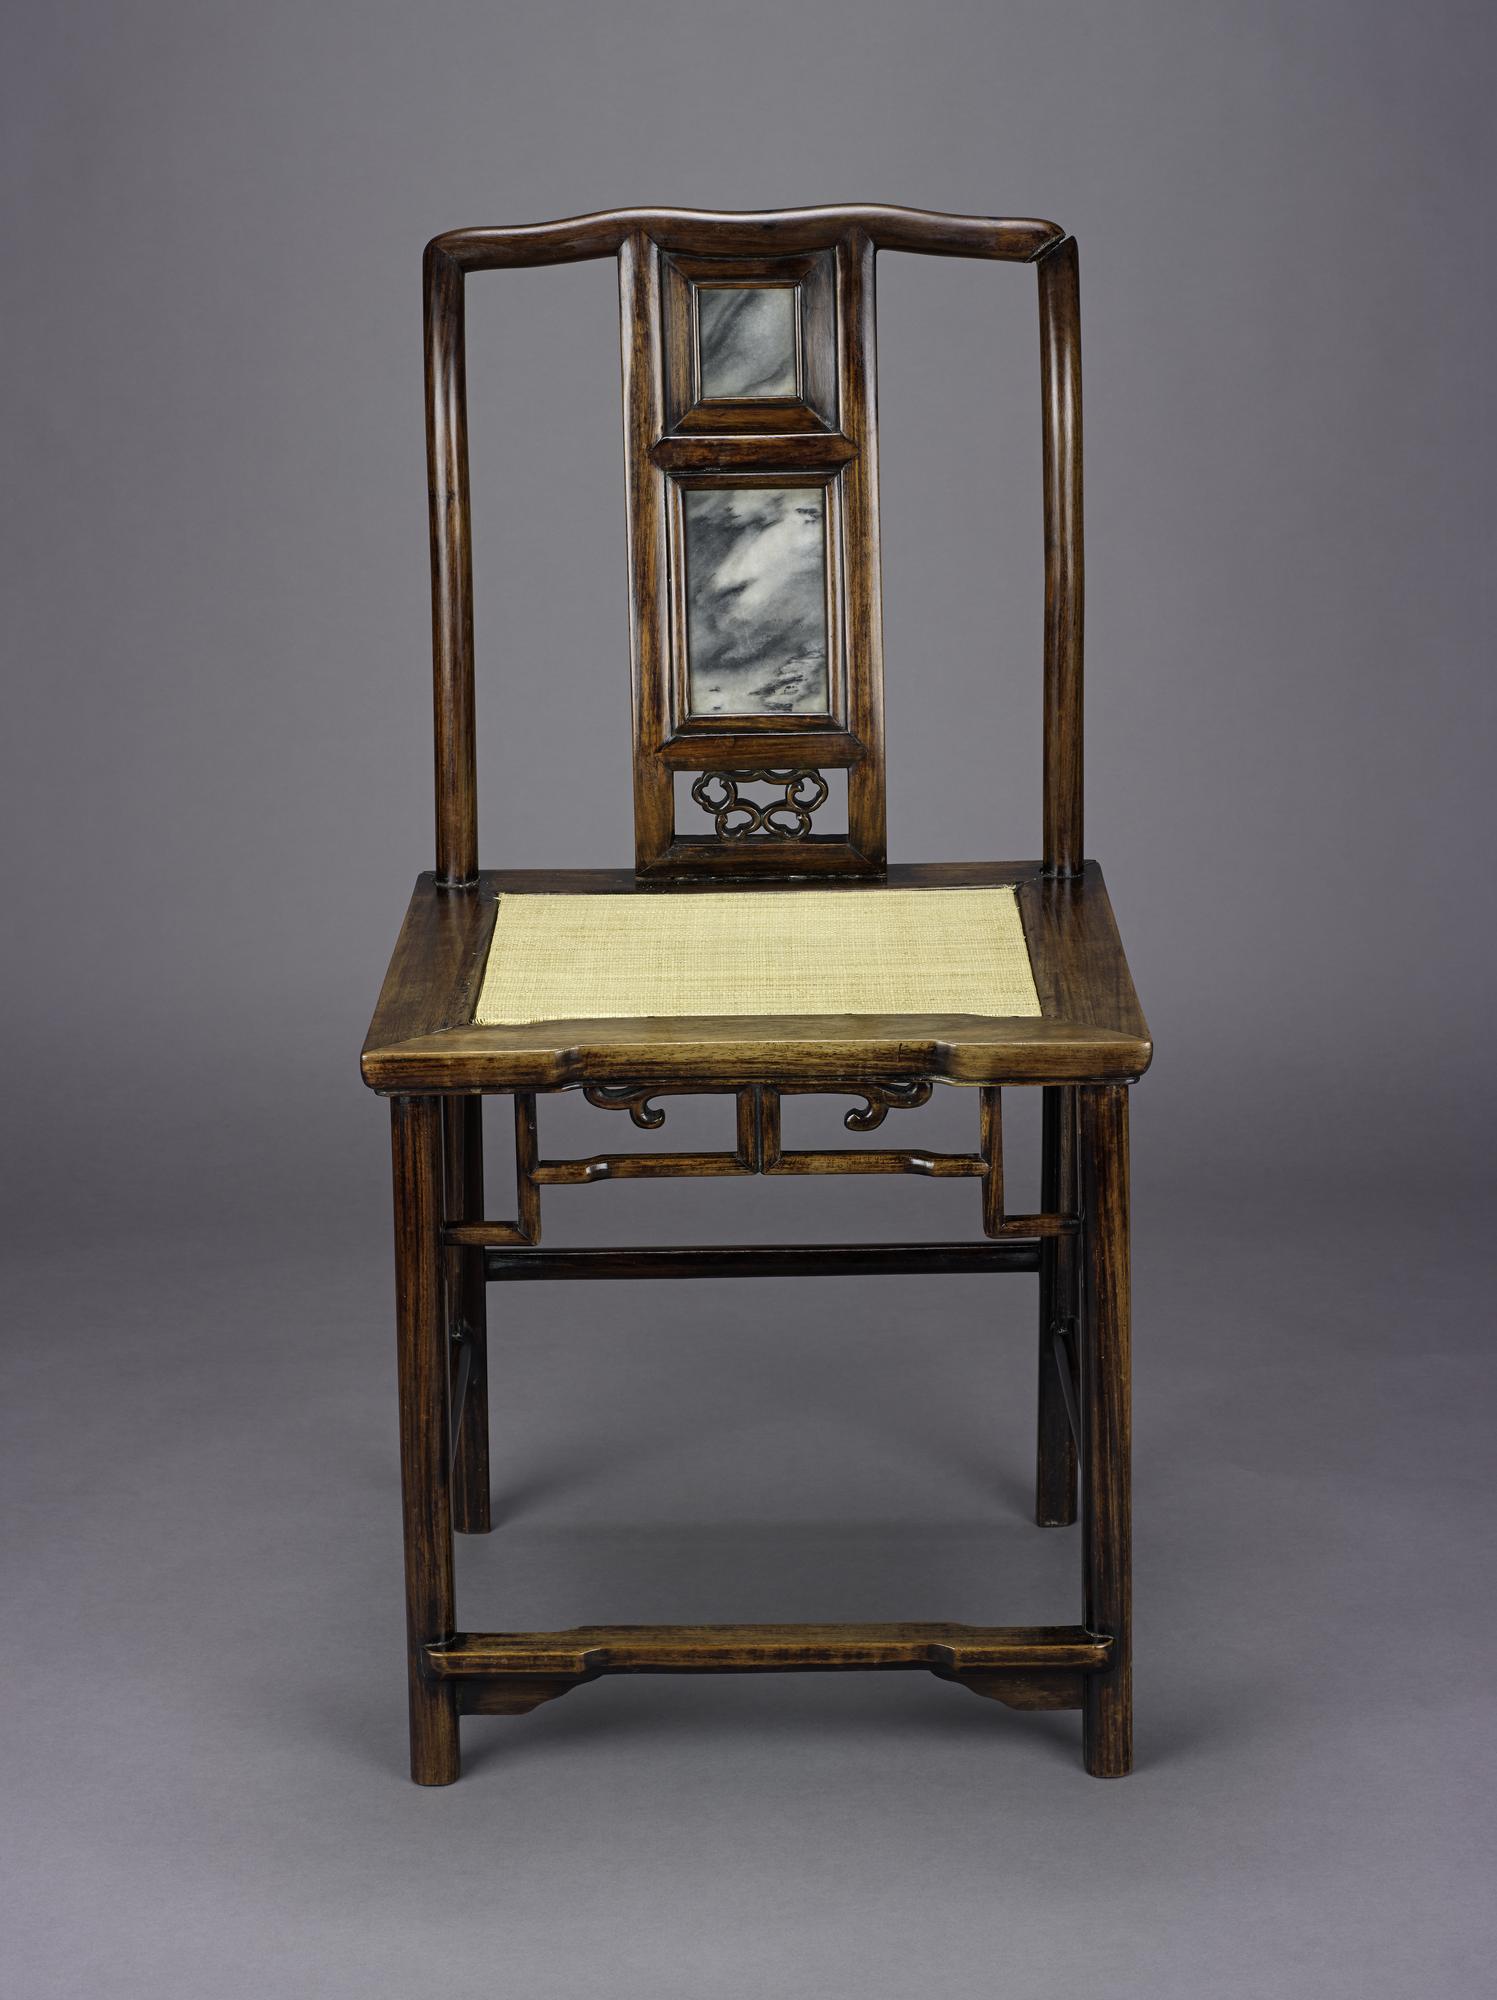 Chair of huanghuali wood, with two inset marble panels on back. China, Qing Dynasty, 19th century. NMS A.1996.99.